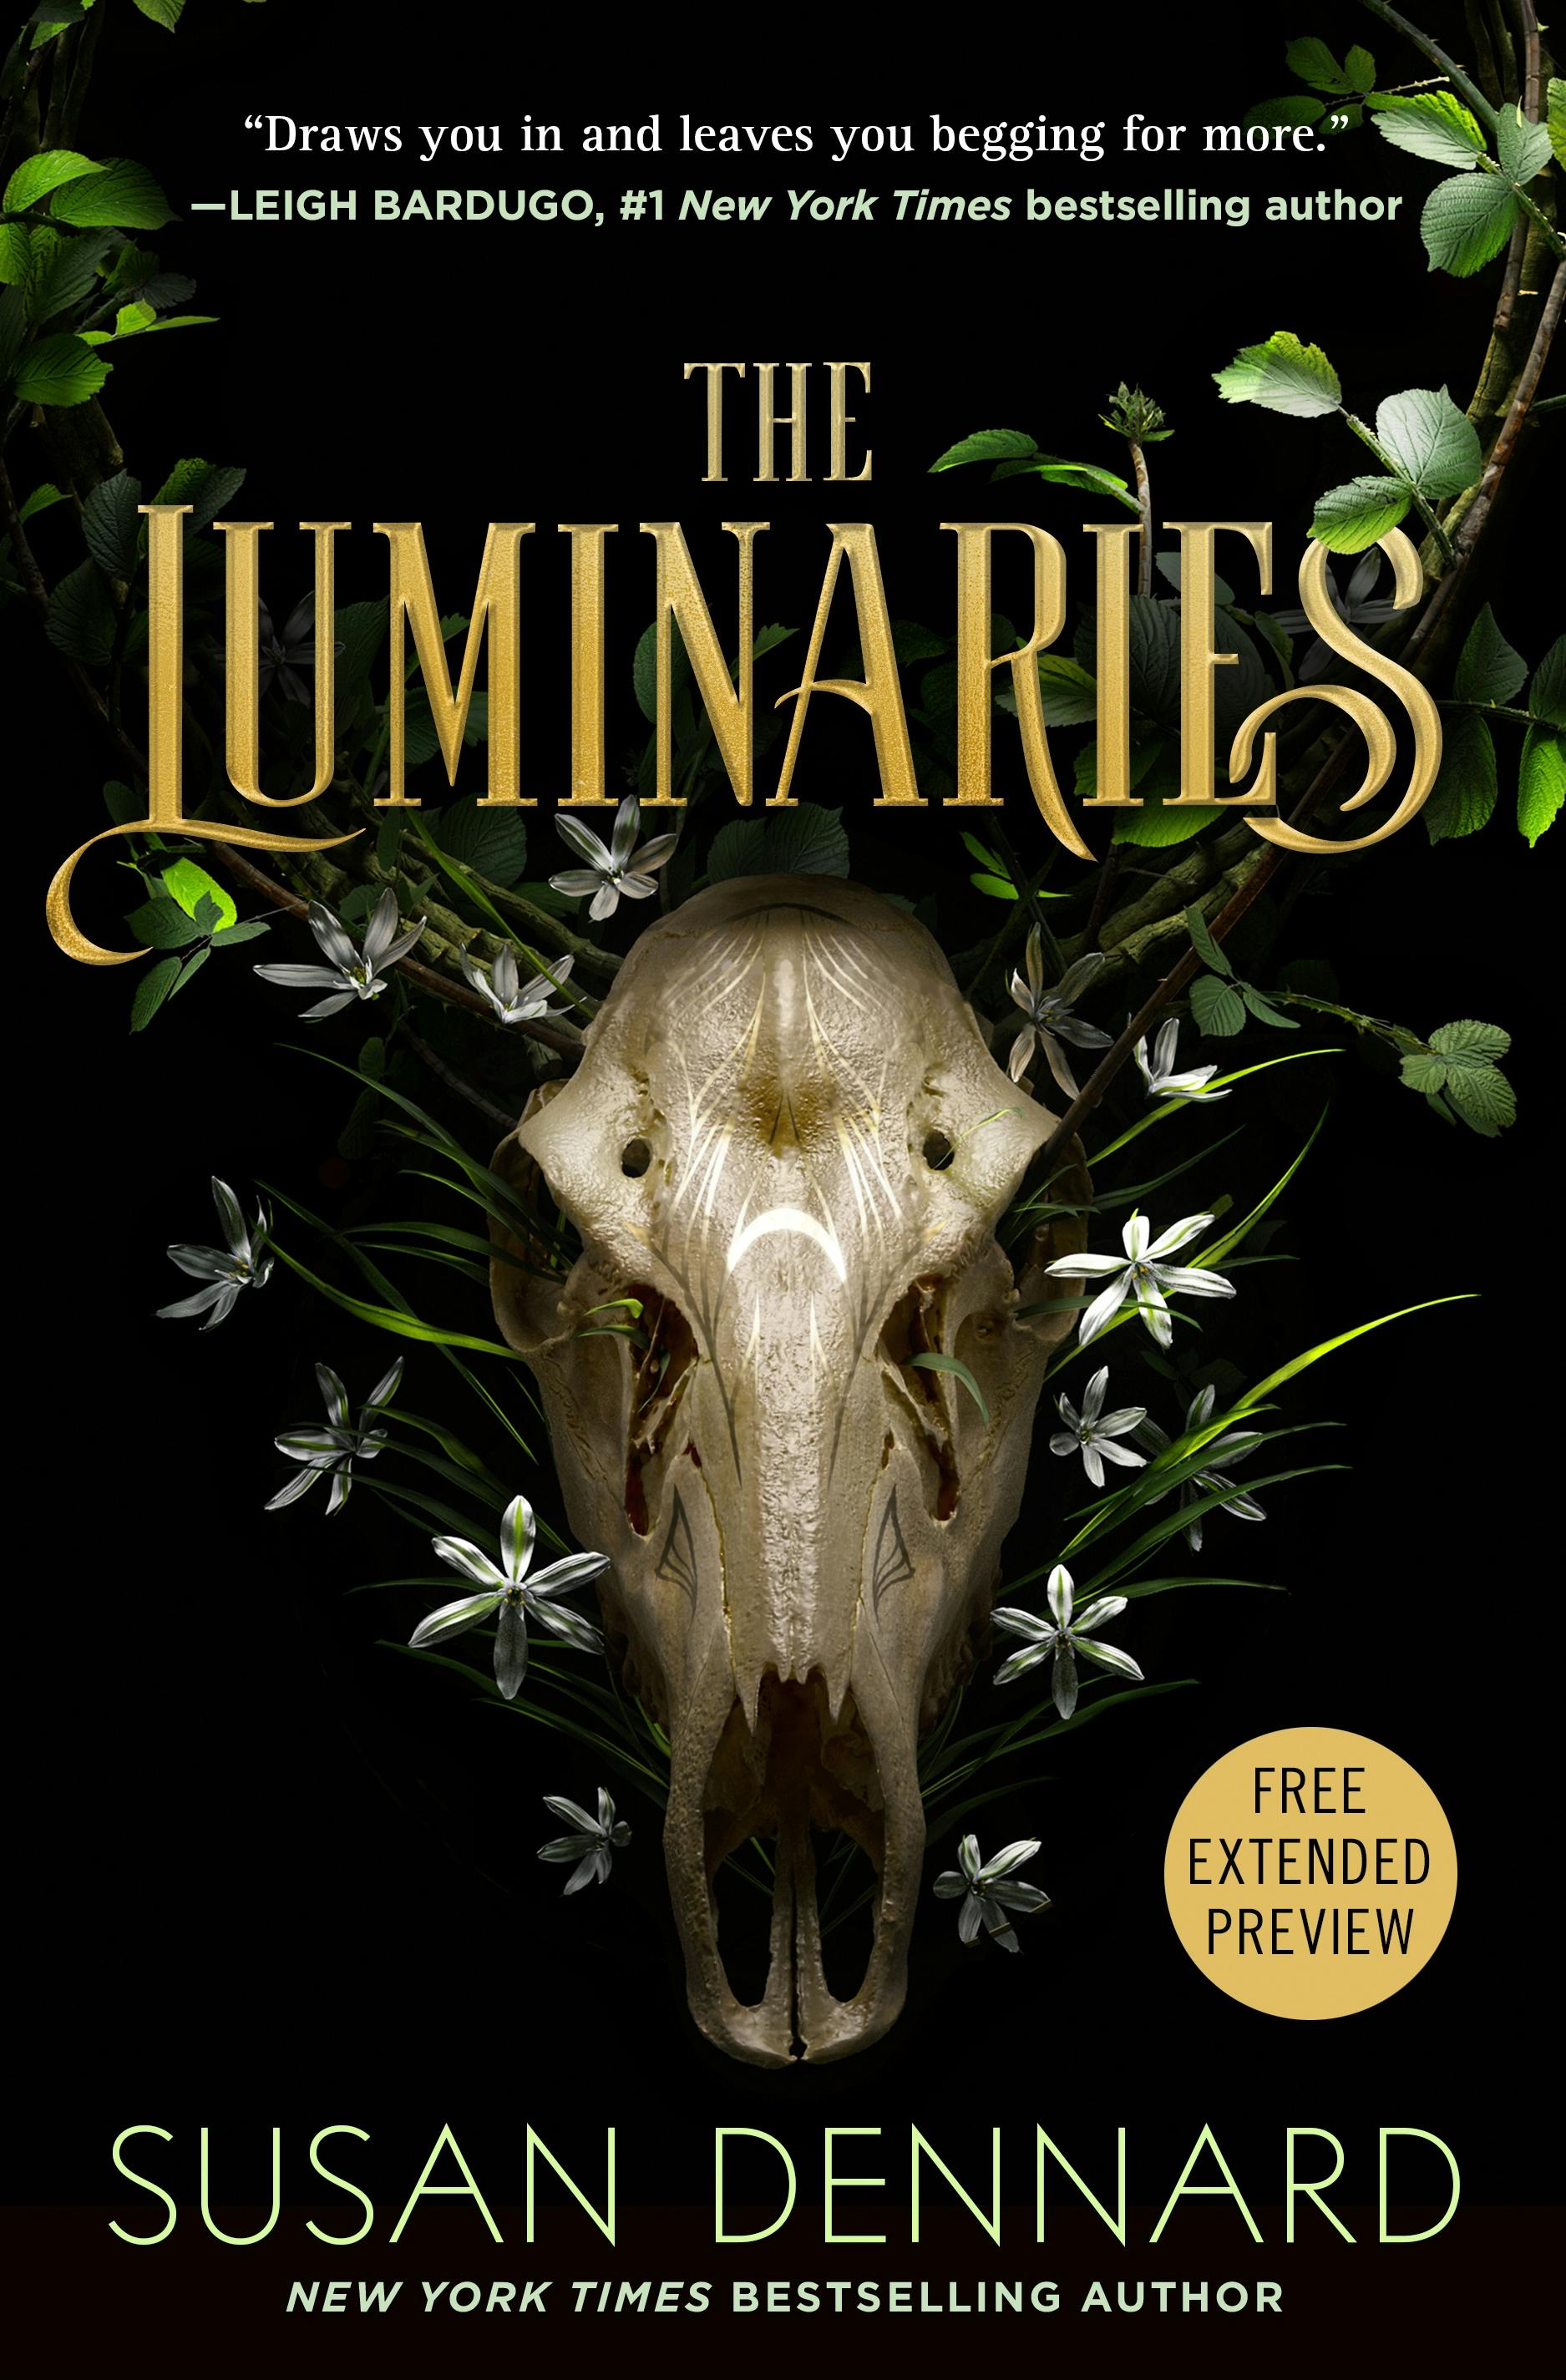 Cover for the book titled as: The Luminaries Sneak Peek